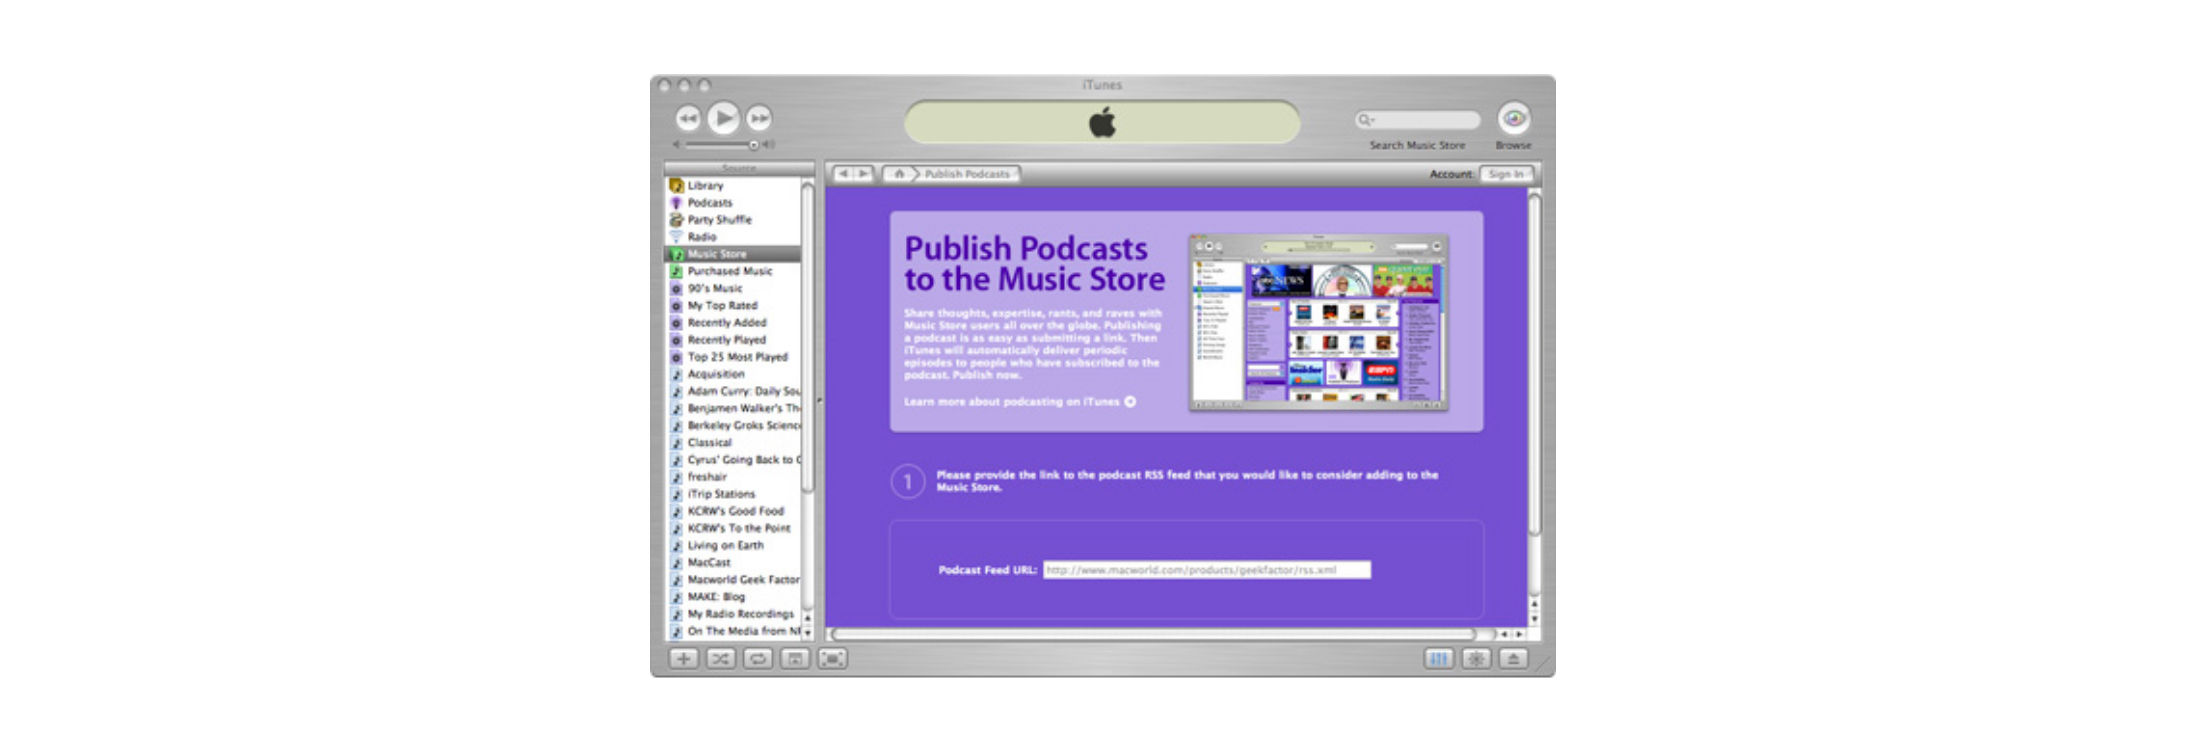 First interface of the Apple Podcast. Credit: Apple